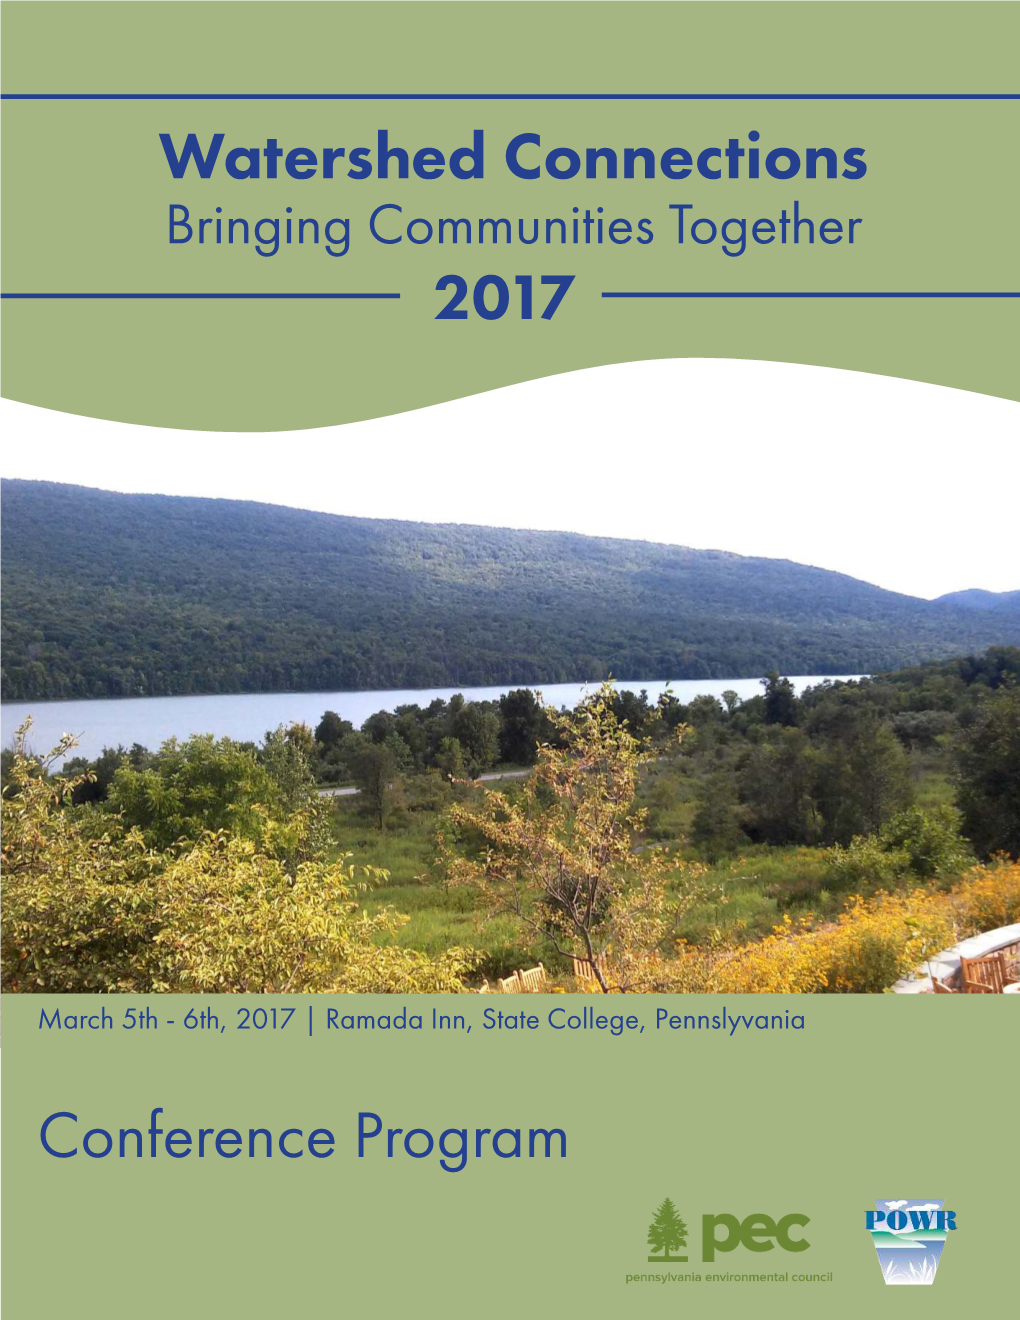 Watershed Connections Conference Program